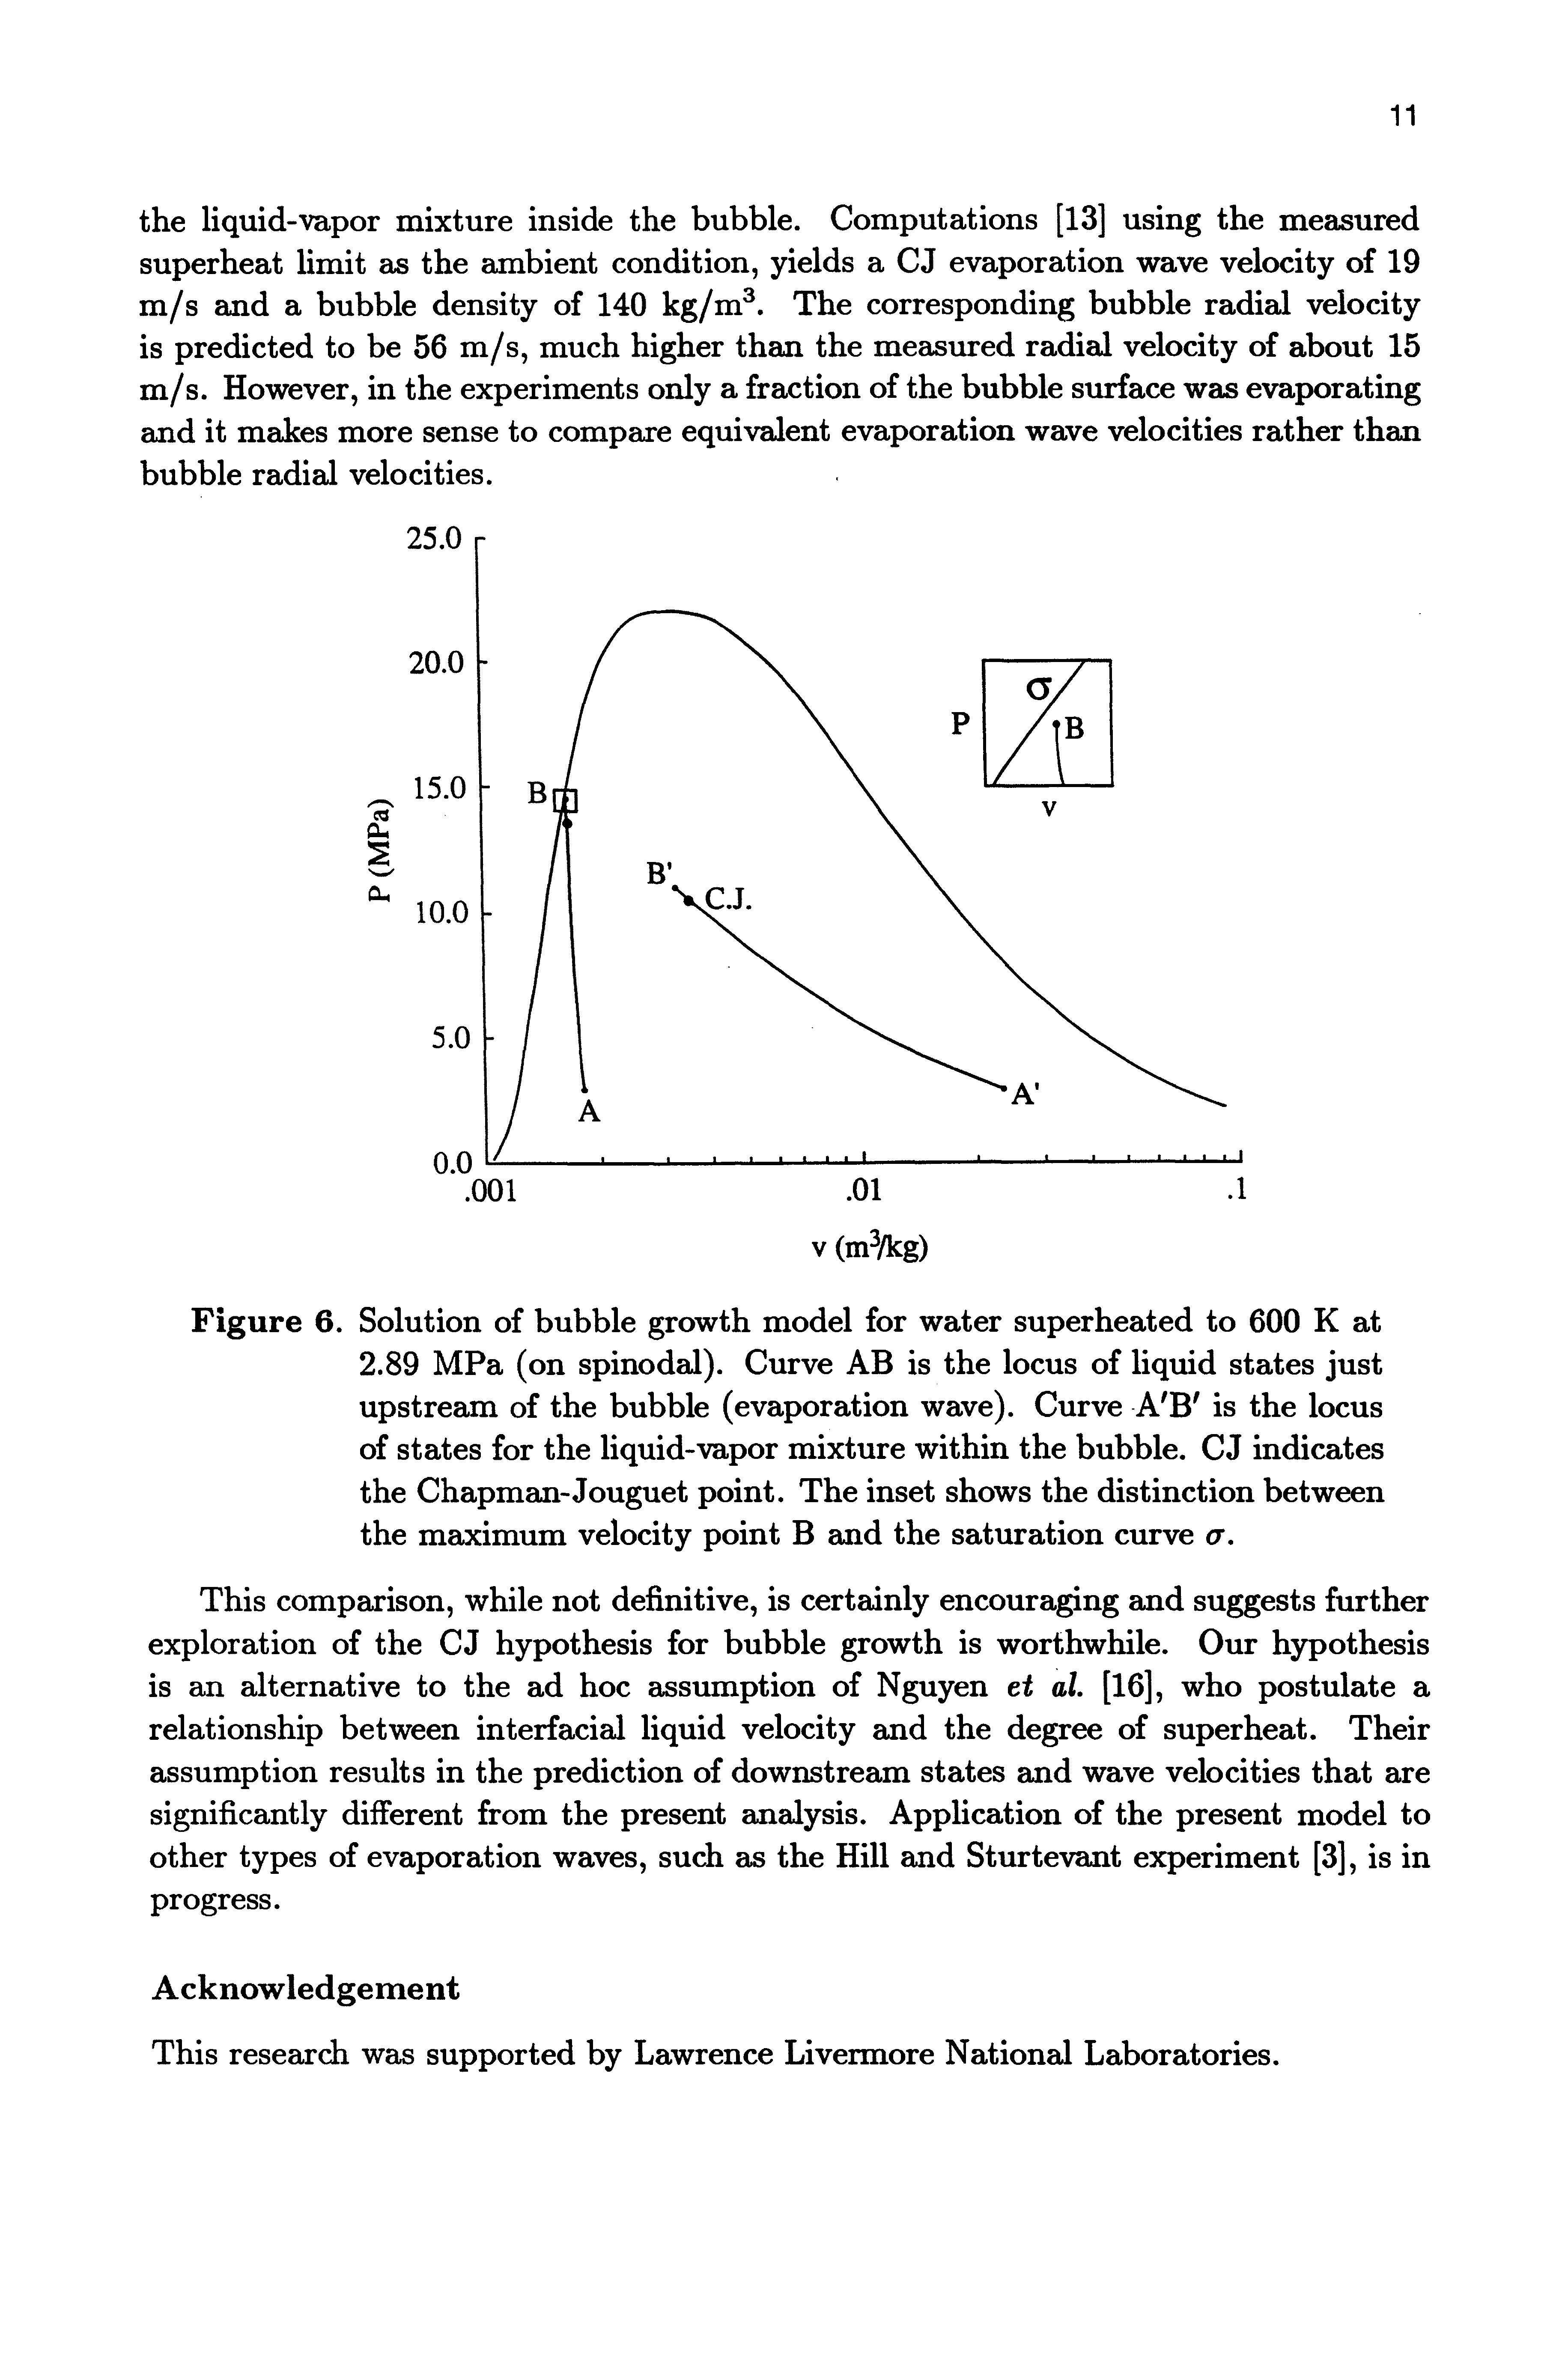 Figure 6. Solution of bubble growth model for water superheated to 600 K at 2.89 MPa (on spinodal). Curve AB is the locus of liquid states just upstream of the bubble (evaporation wave). Curve A B is the locus of states for the liquid-vapor mixture within the bubble. CJ indicates the Chapman-Jouguet point. The inset shows the distinction between the maximum velocity point B and the satturation curve <r.